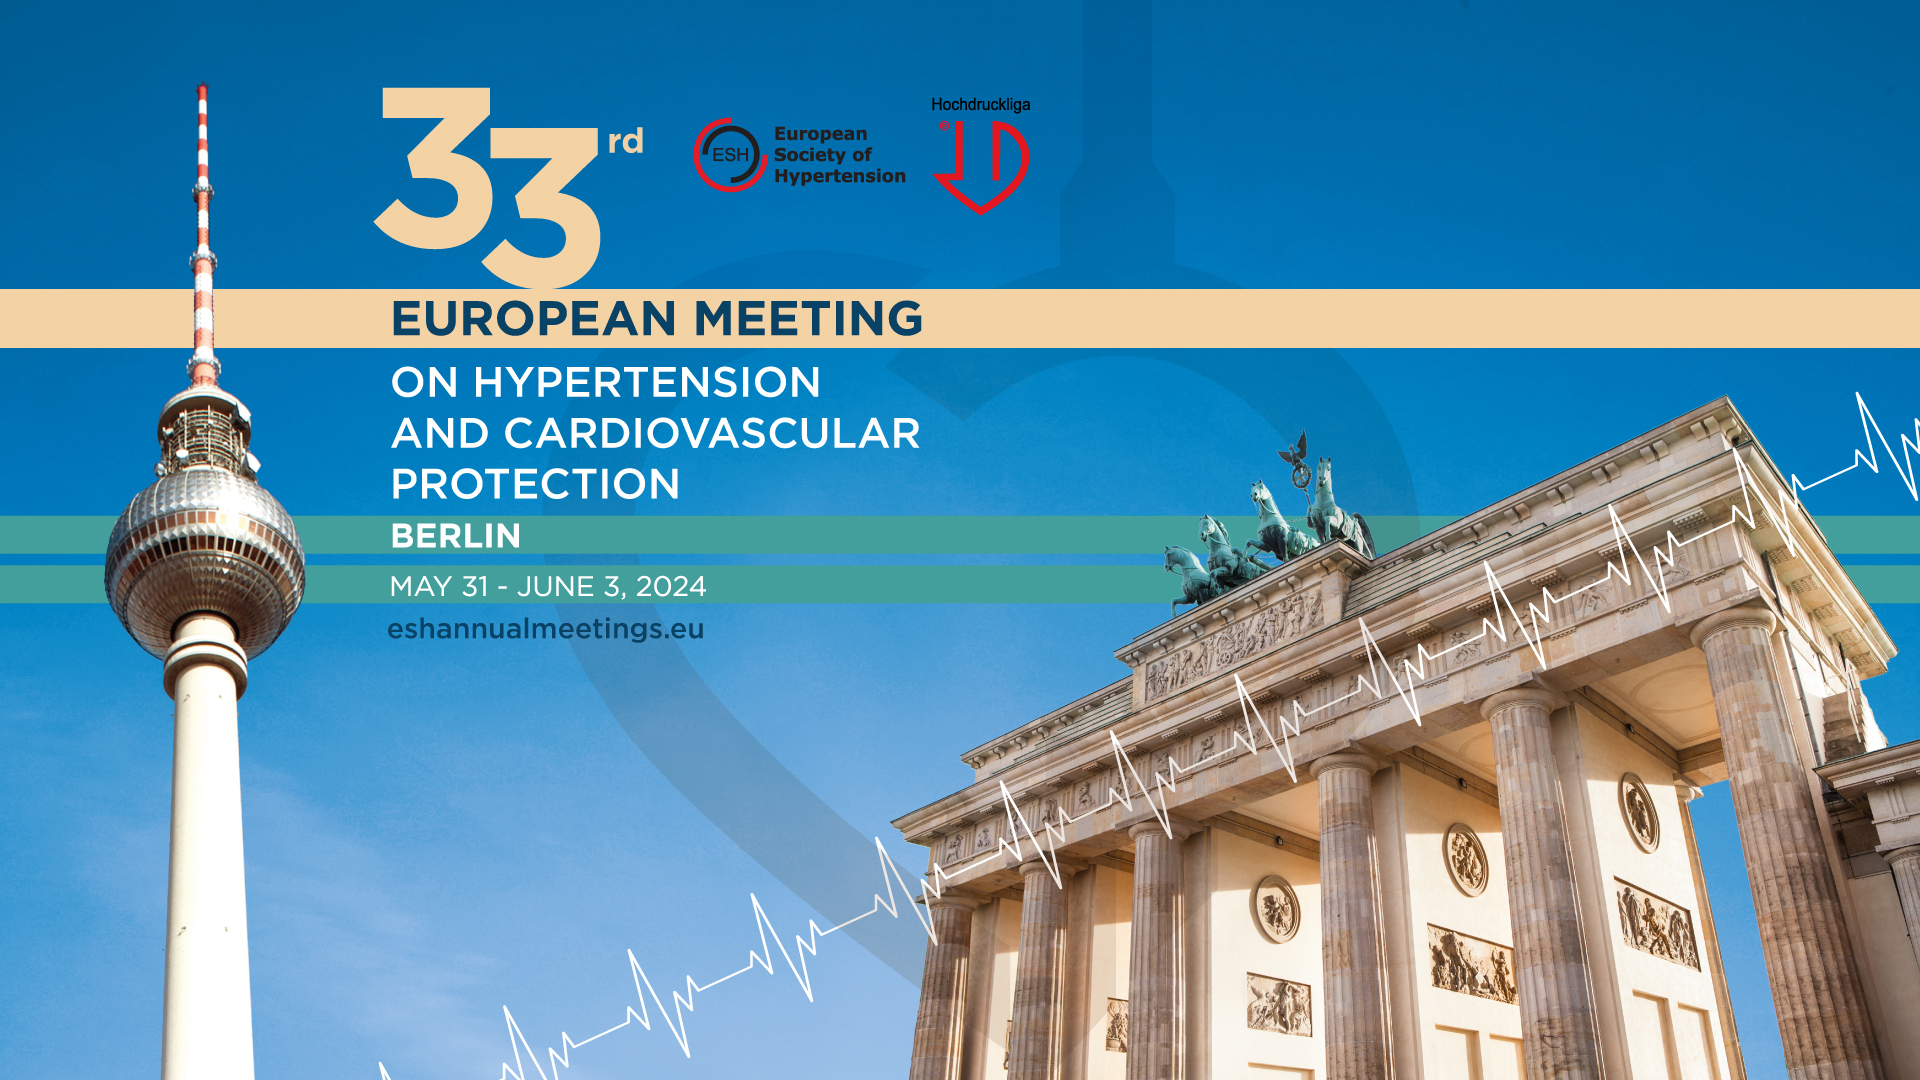 ESH 2024(33rd European Meeting on Hypertension and Cardiovascular Protection)